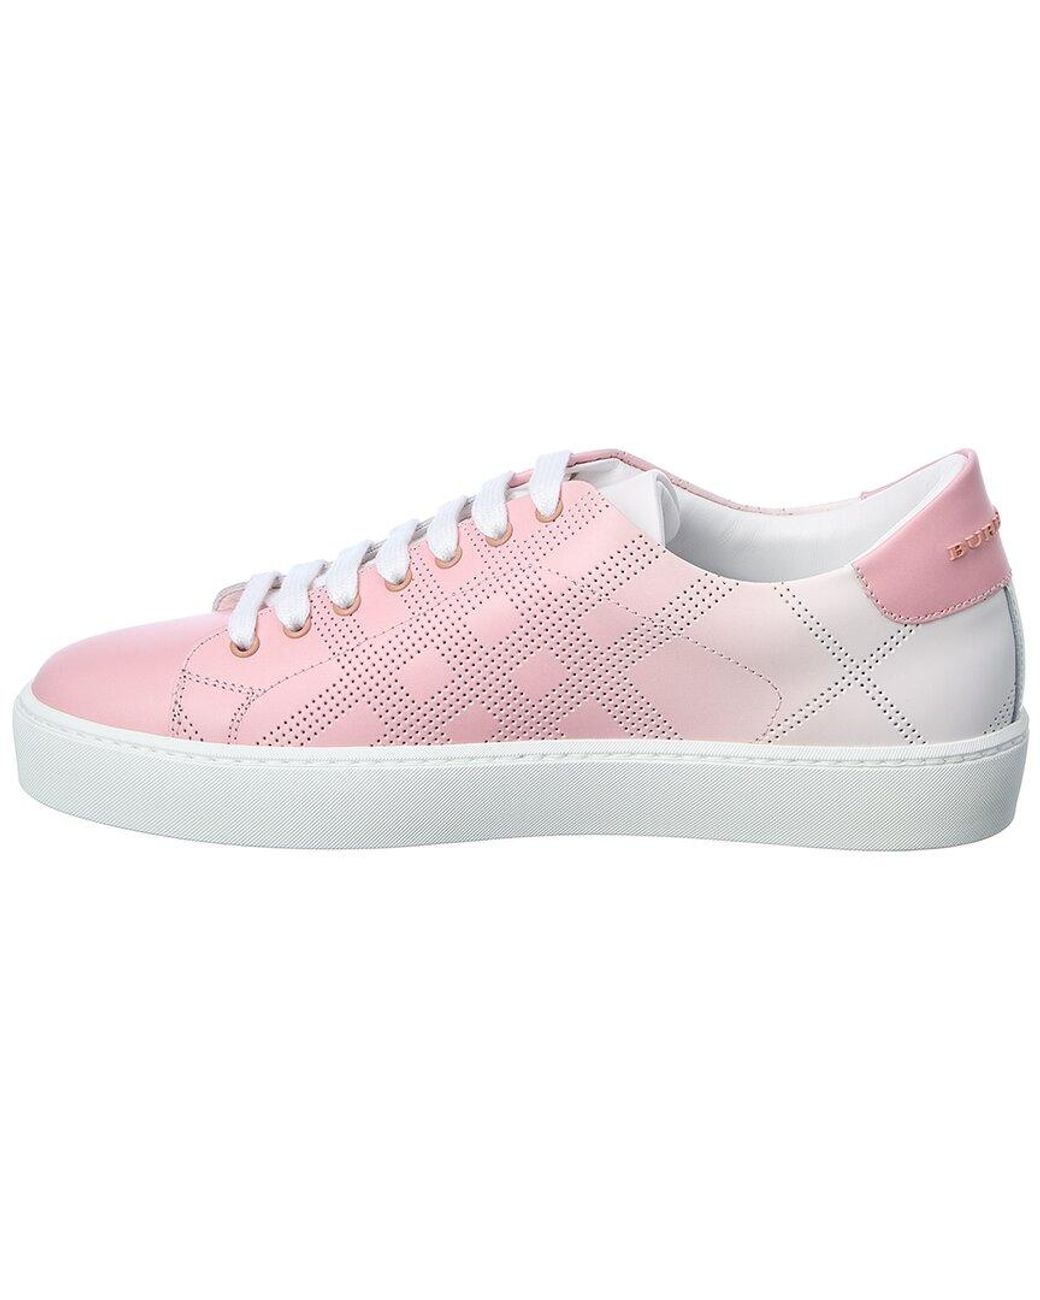 Burberry Westford Perforated Check Leather Sneaker in Pink | Lyst